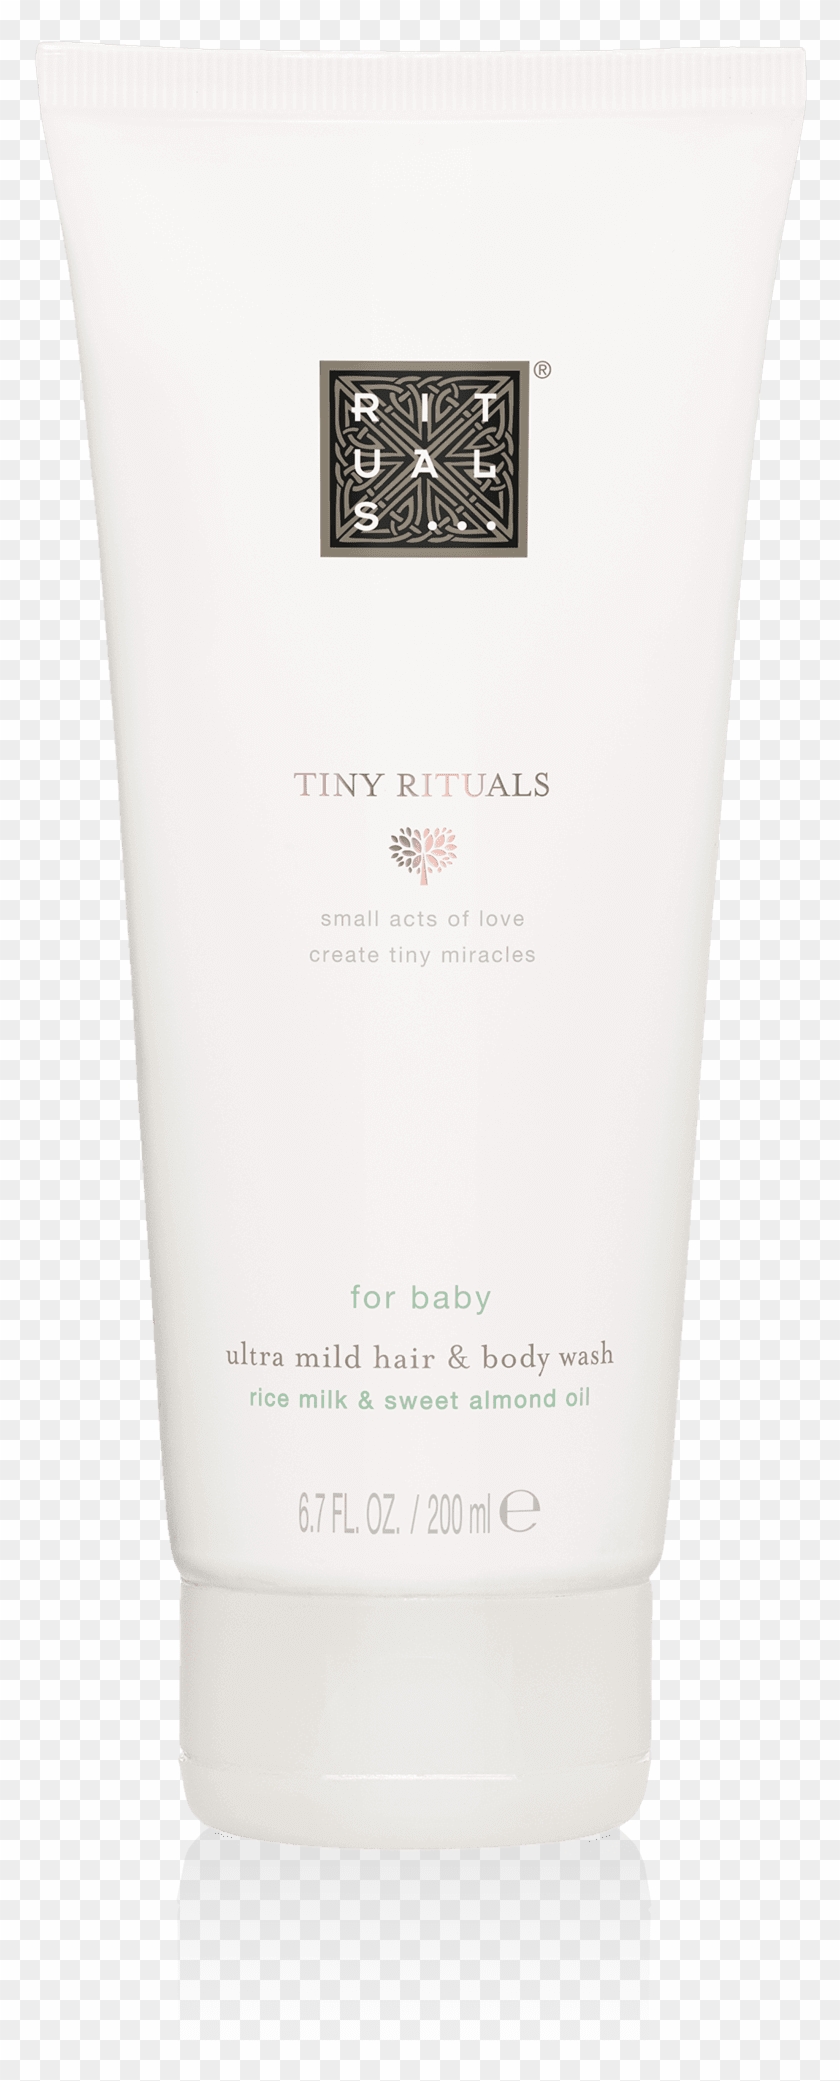 Tiny Rituals Baby Hair & Body Wash - Bottle Clipart